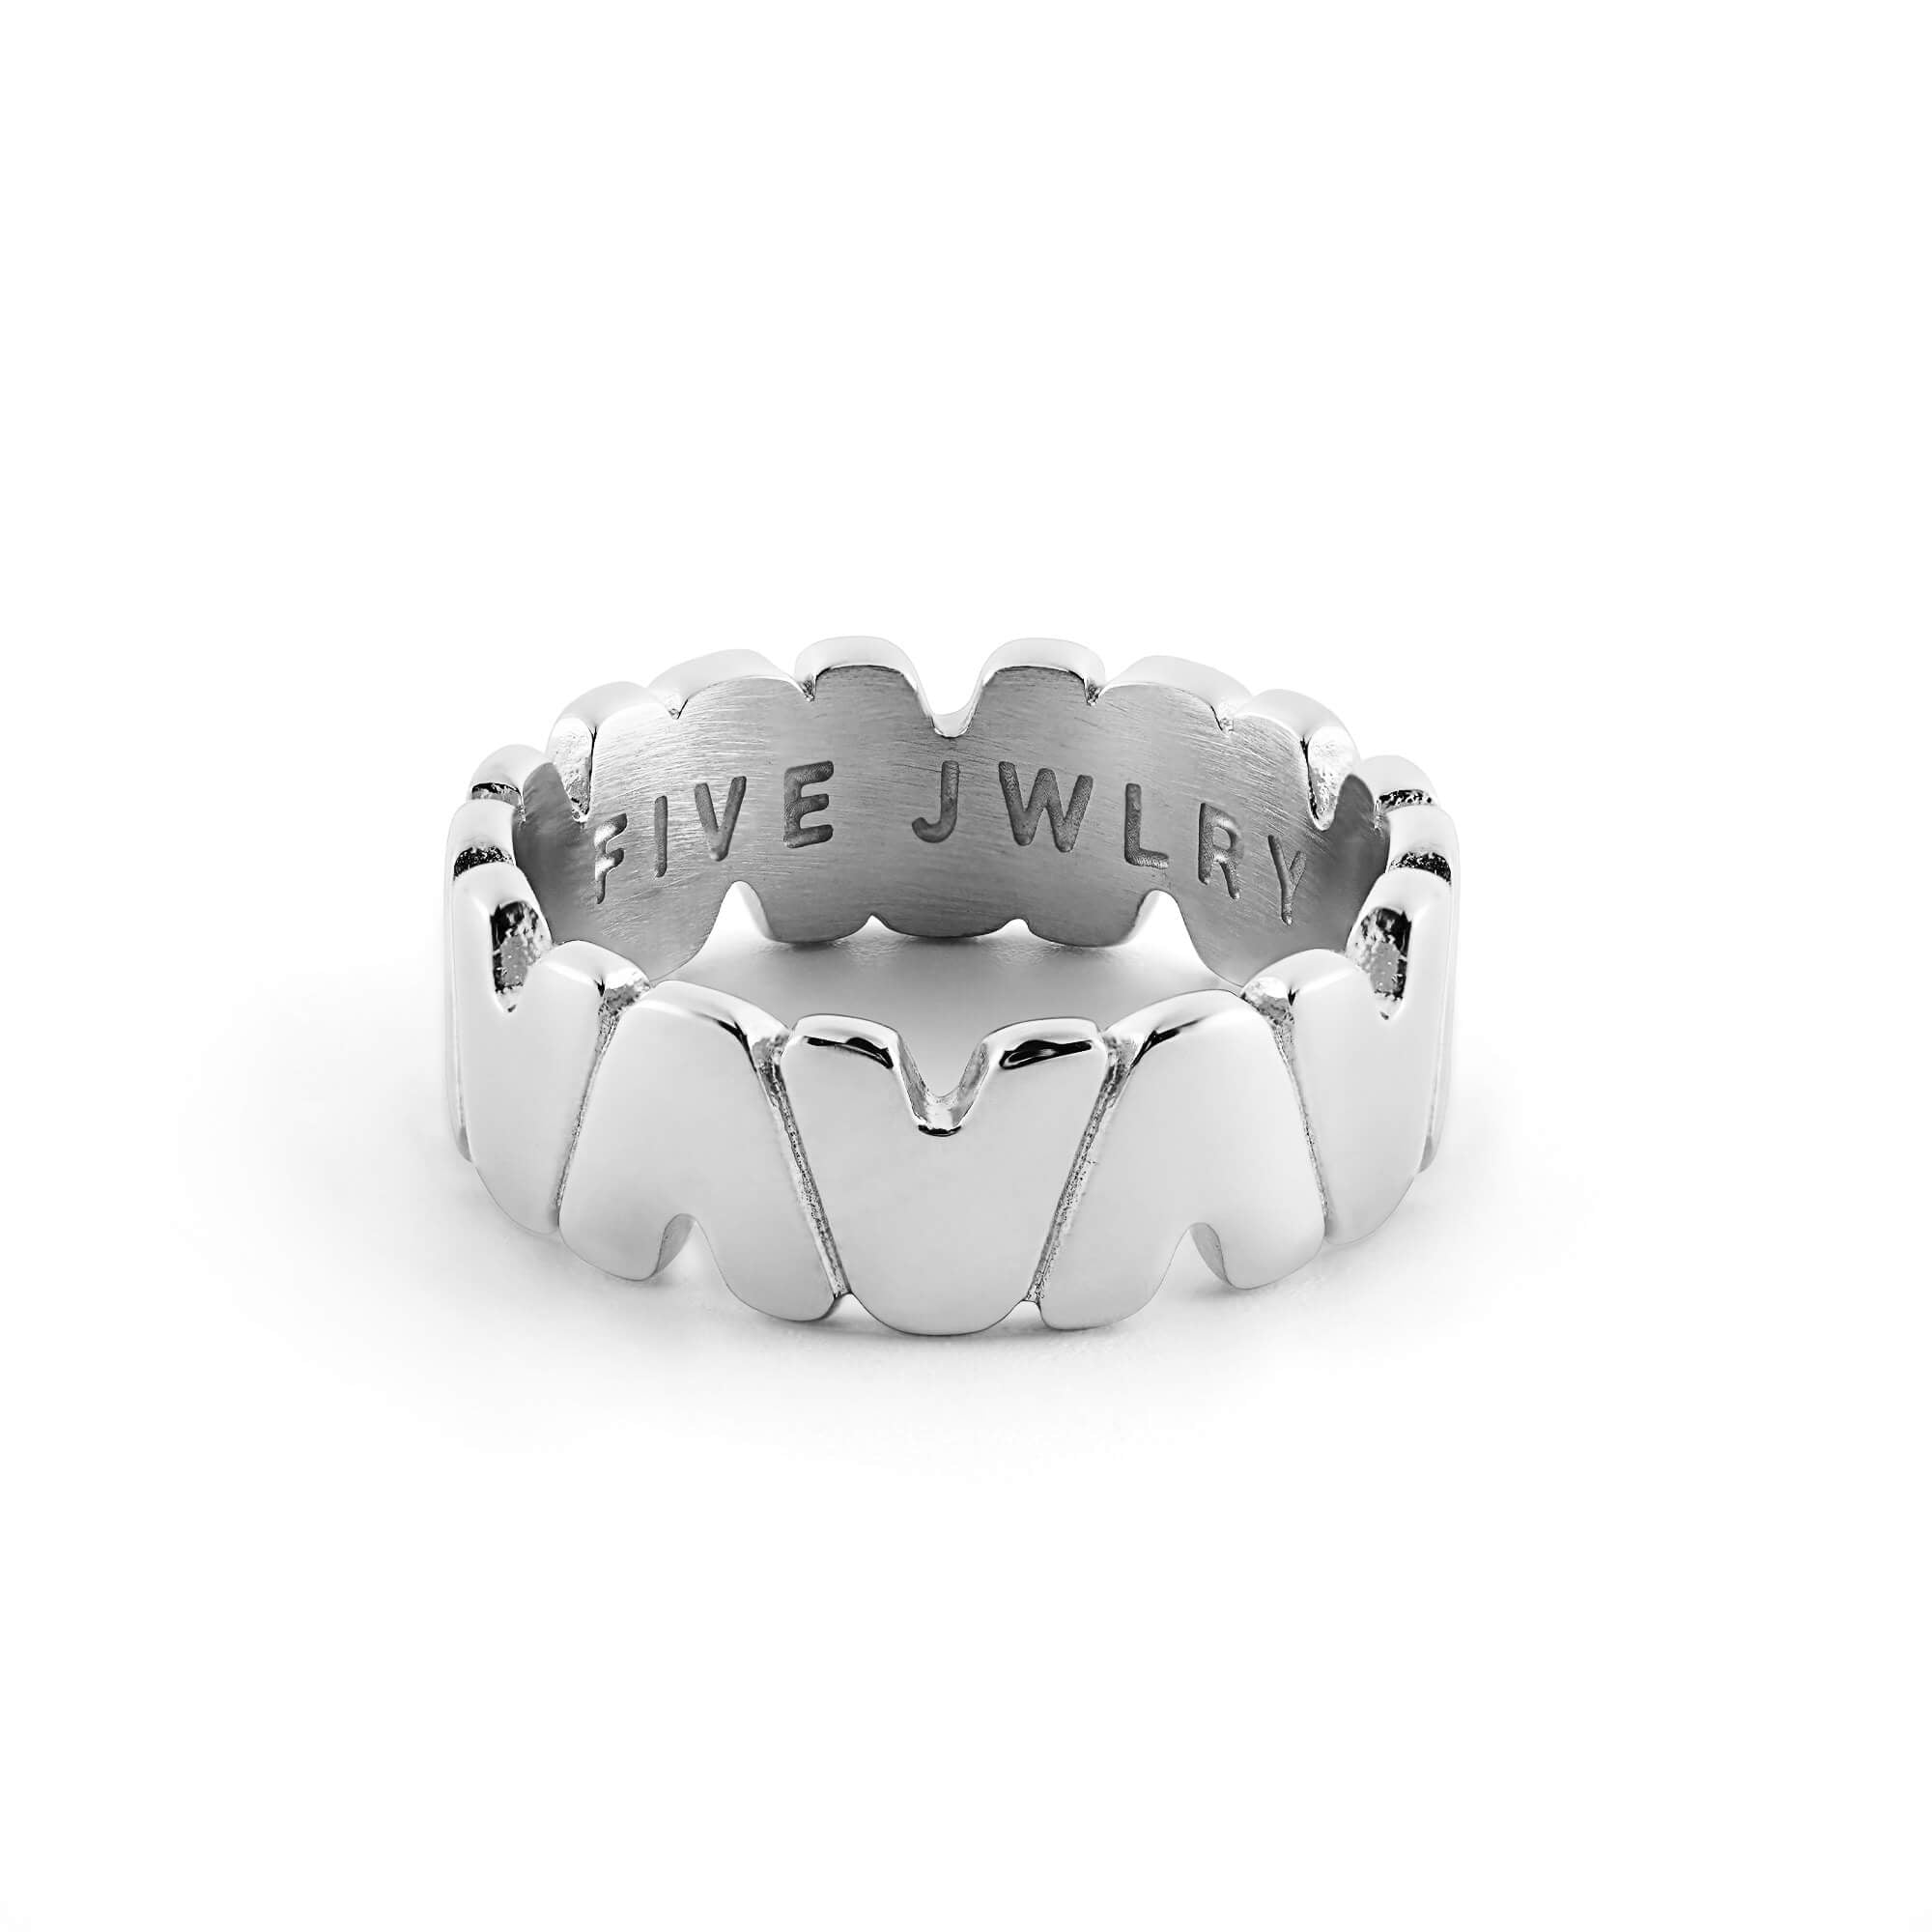 SAINQ women's ring by Five Jwlry, designed in silver and uniquely shaped using the Roman numeral 'V' for five. Made from water-resistant 316L stainless steel. Hypoallergenic with a 2-year warranty.